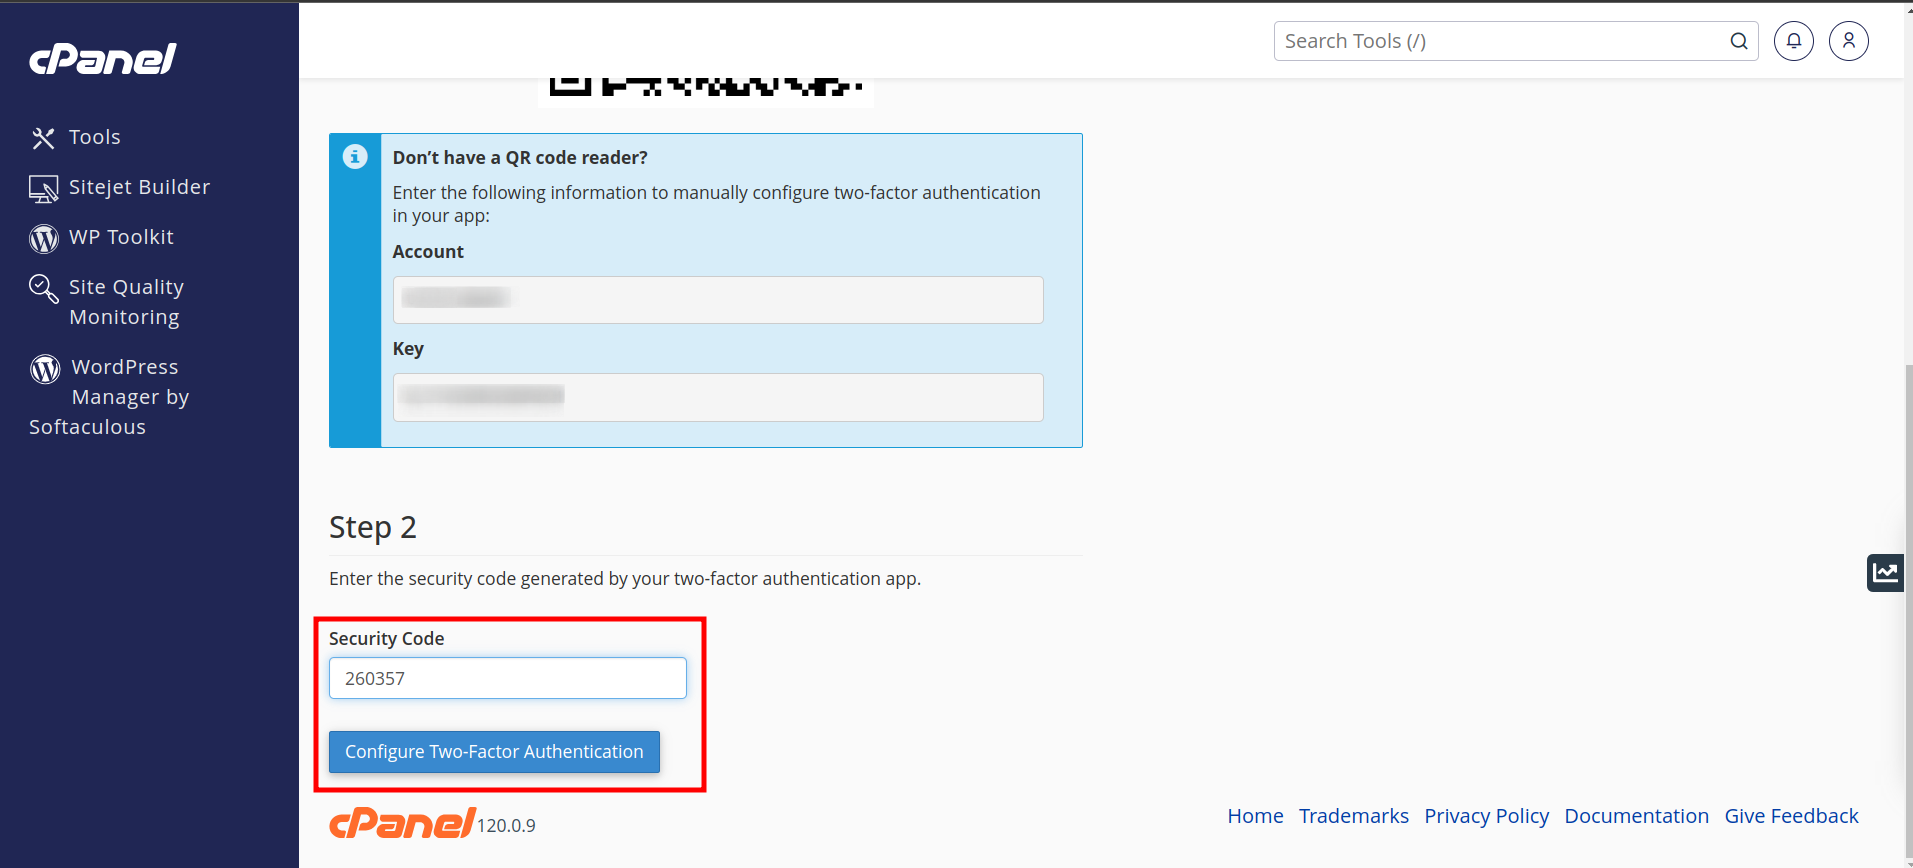 Cara mengaktifkan Two-Factor Authentication cPanel